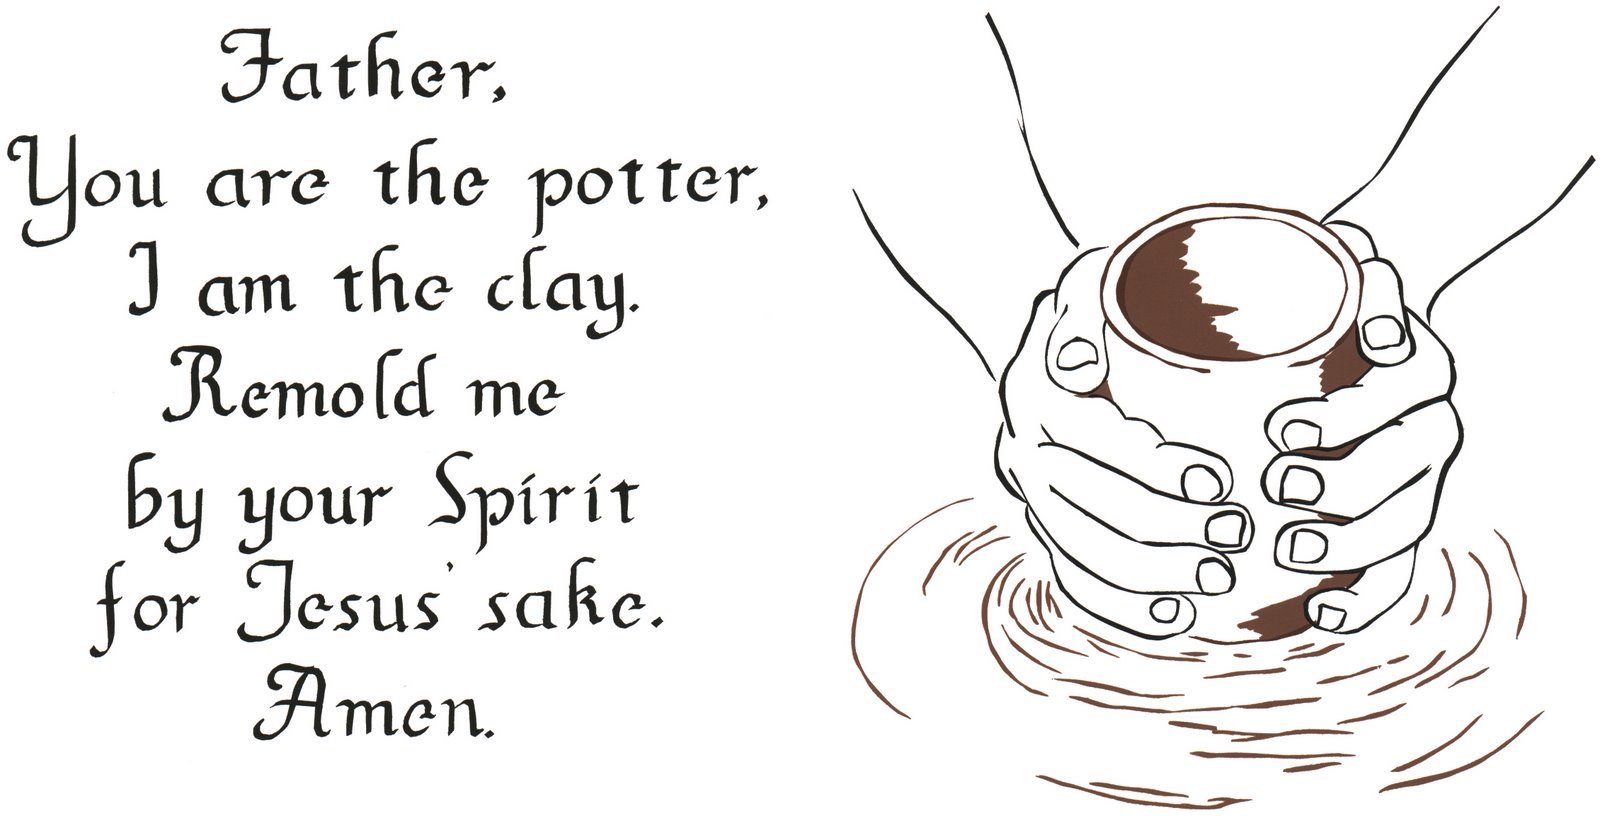 [You+are+the+potter.jpg]